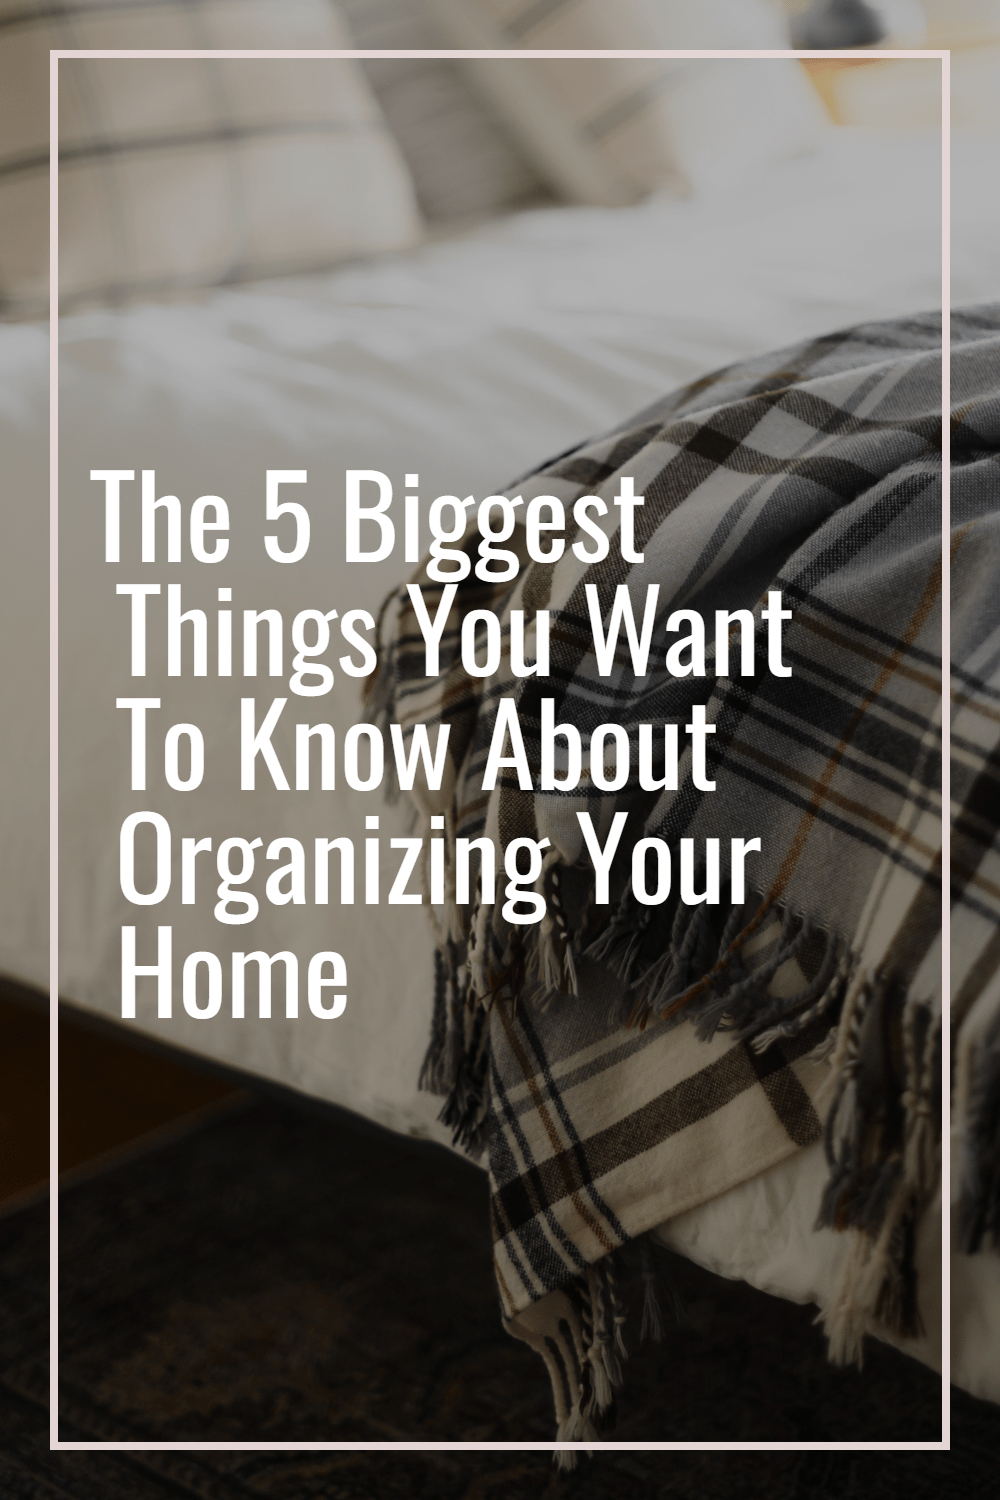 The 5 Biggest Things You Want to Know About Organizing Your Home, tidy bedroom